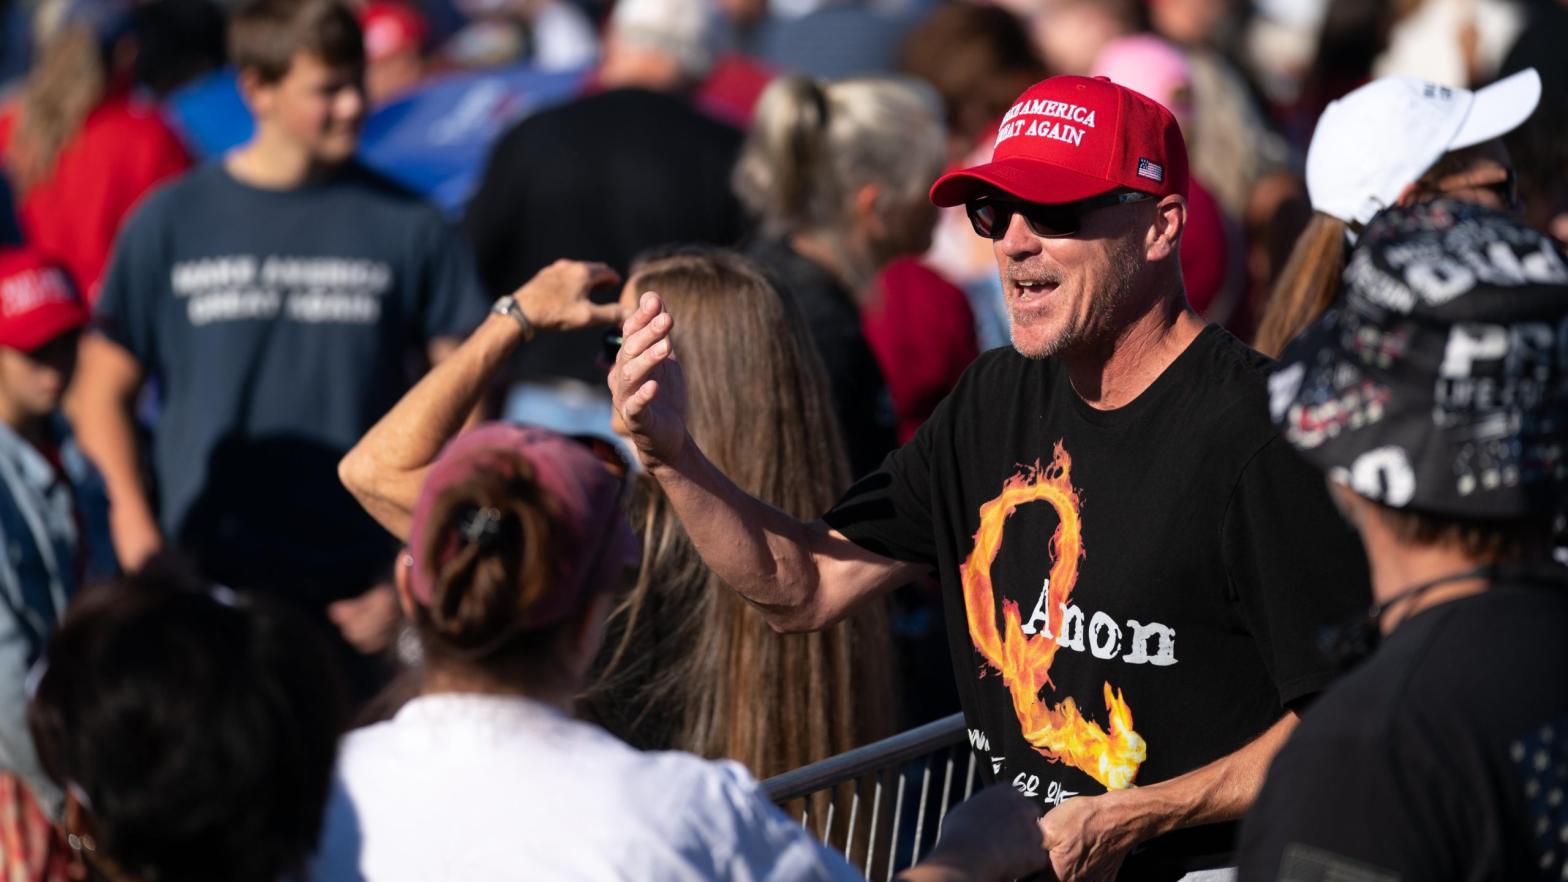 A man in QAnon garb at a Donald Trump rally on September 25, 2021 in Perry, Georgia. (Photo: Sean Rayford, Getty Images)